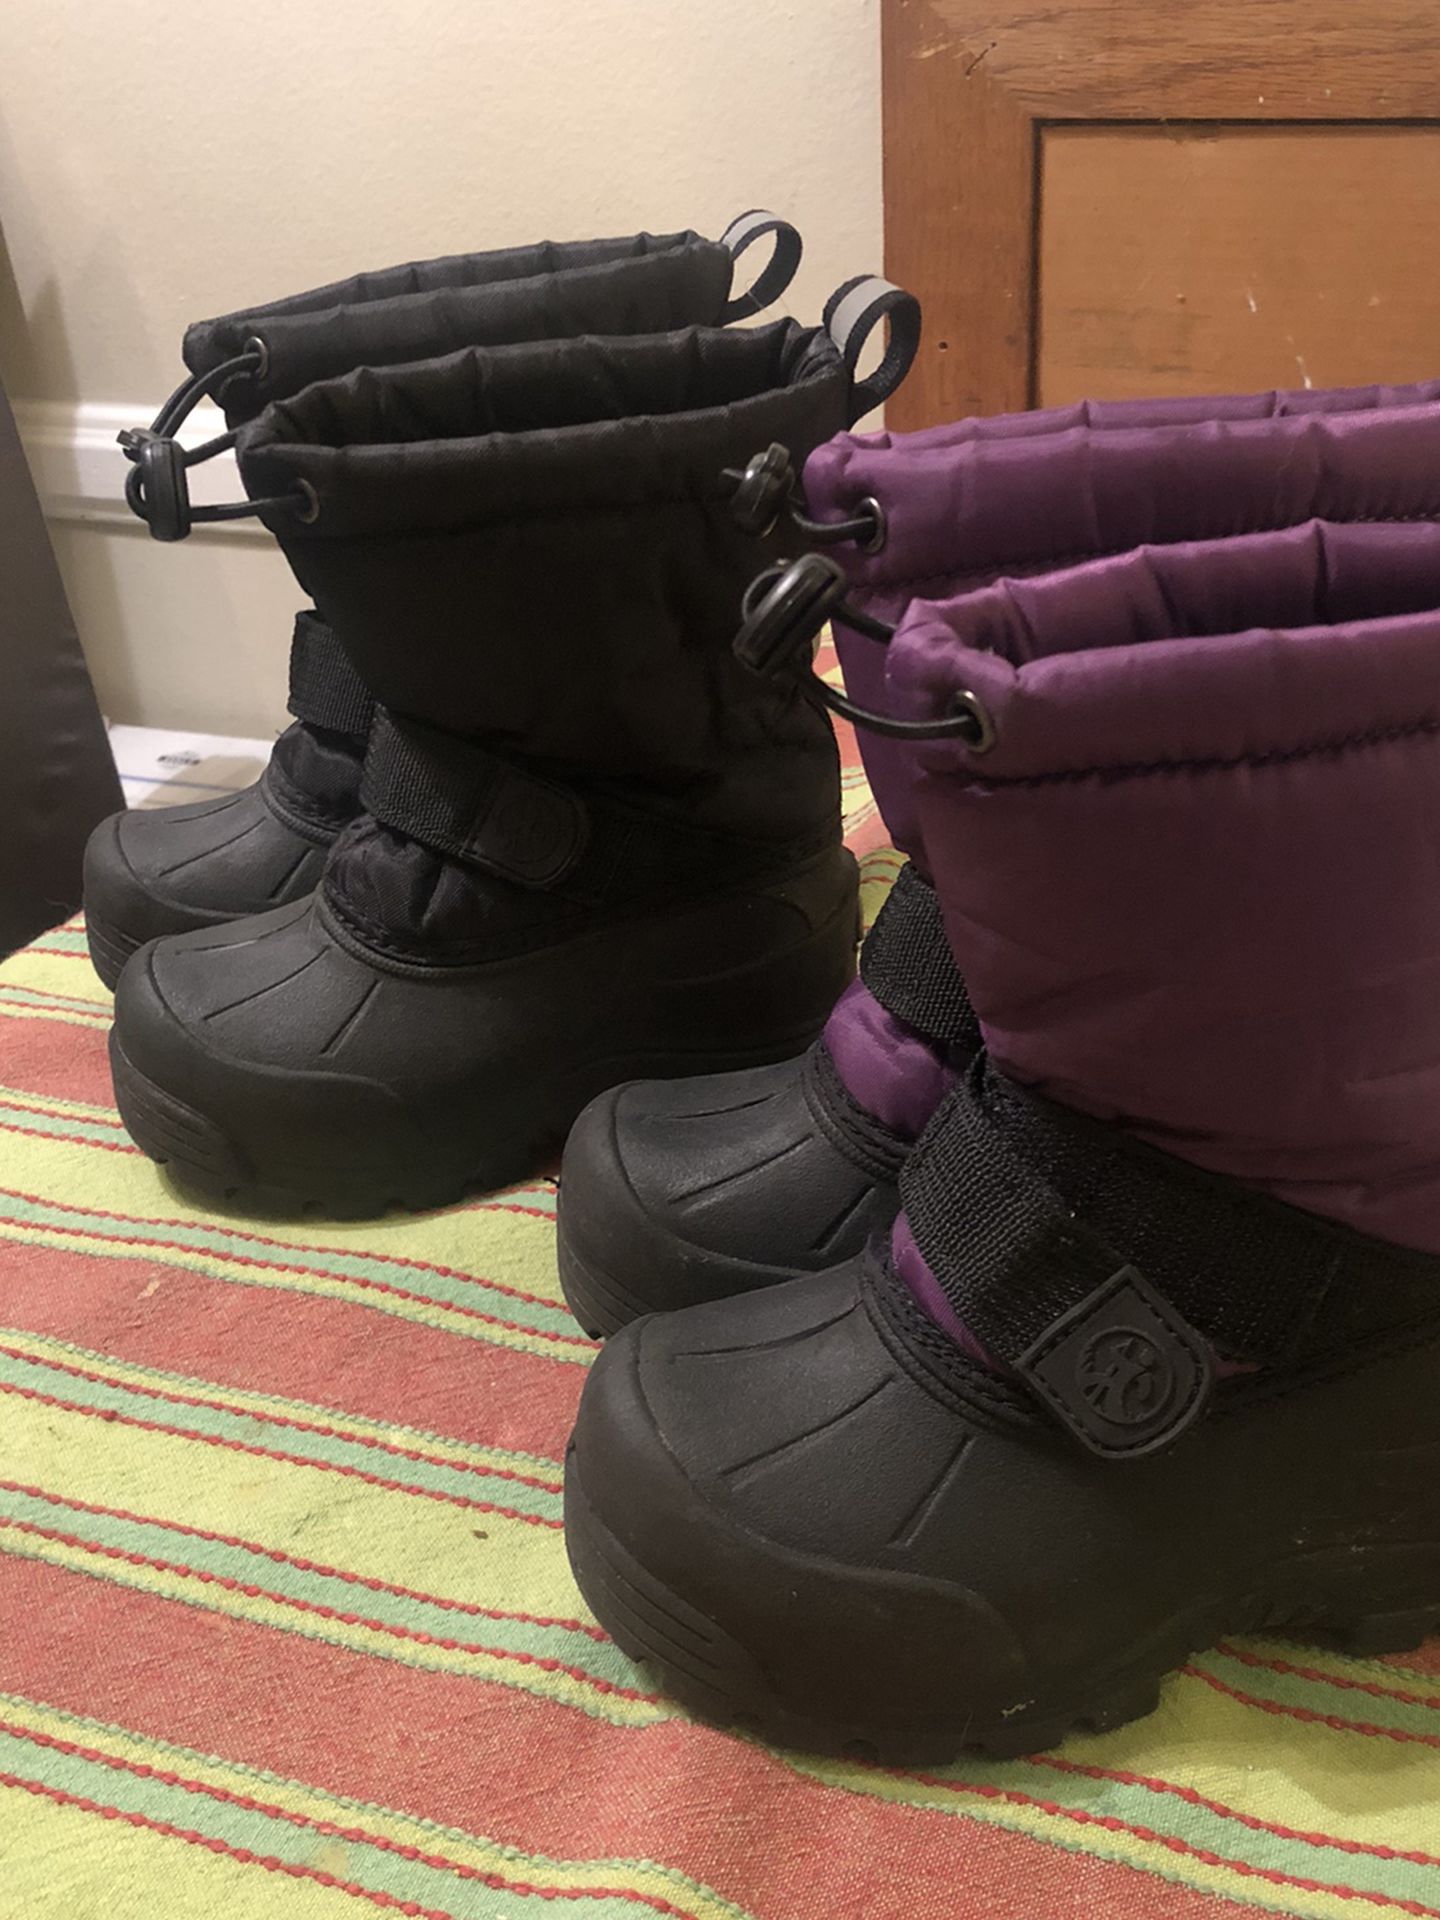 Toddler size 8 Snow Boot $10 Each Only The Purple Are Available